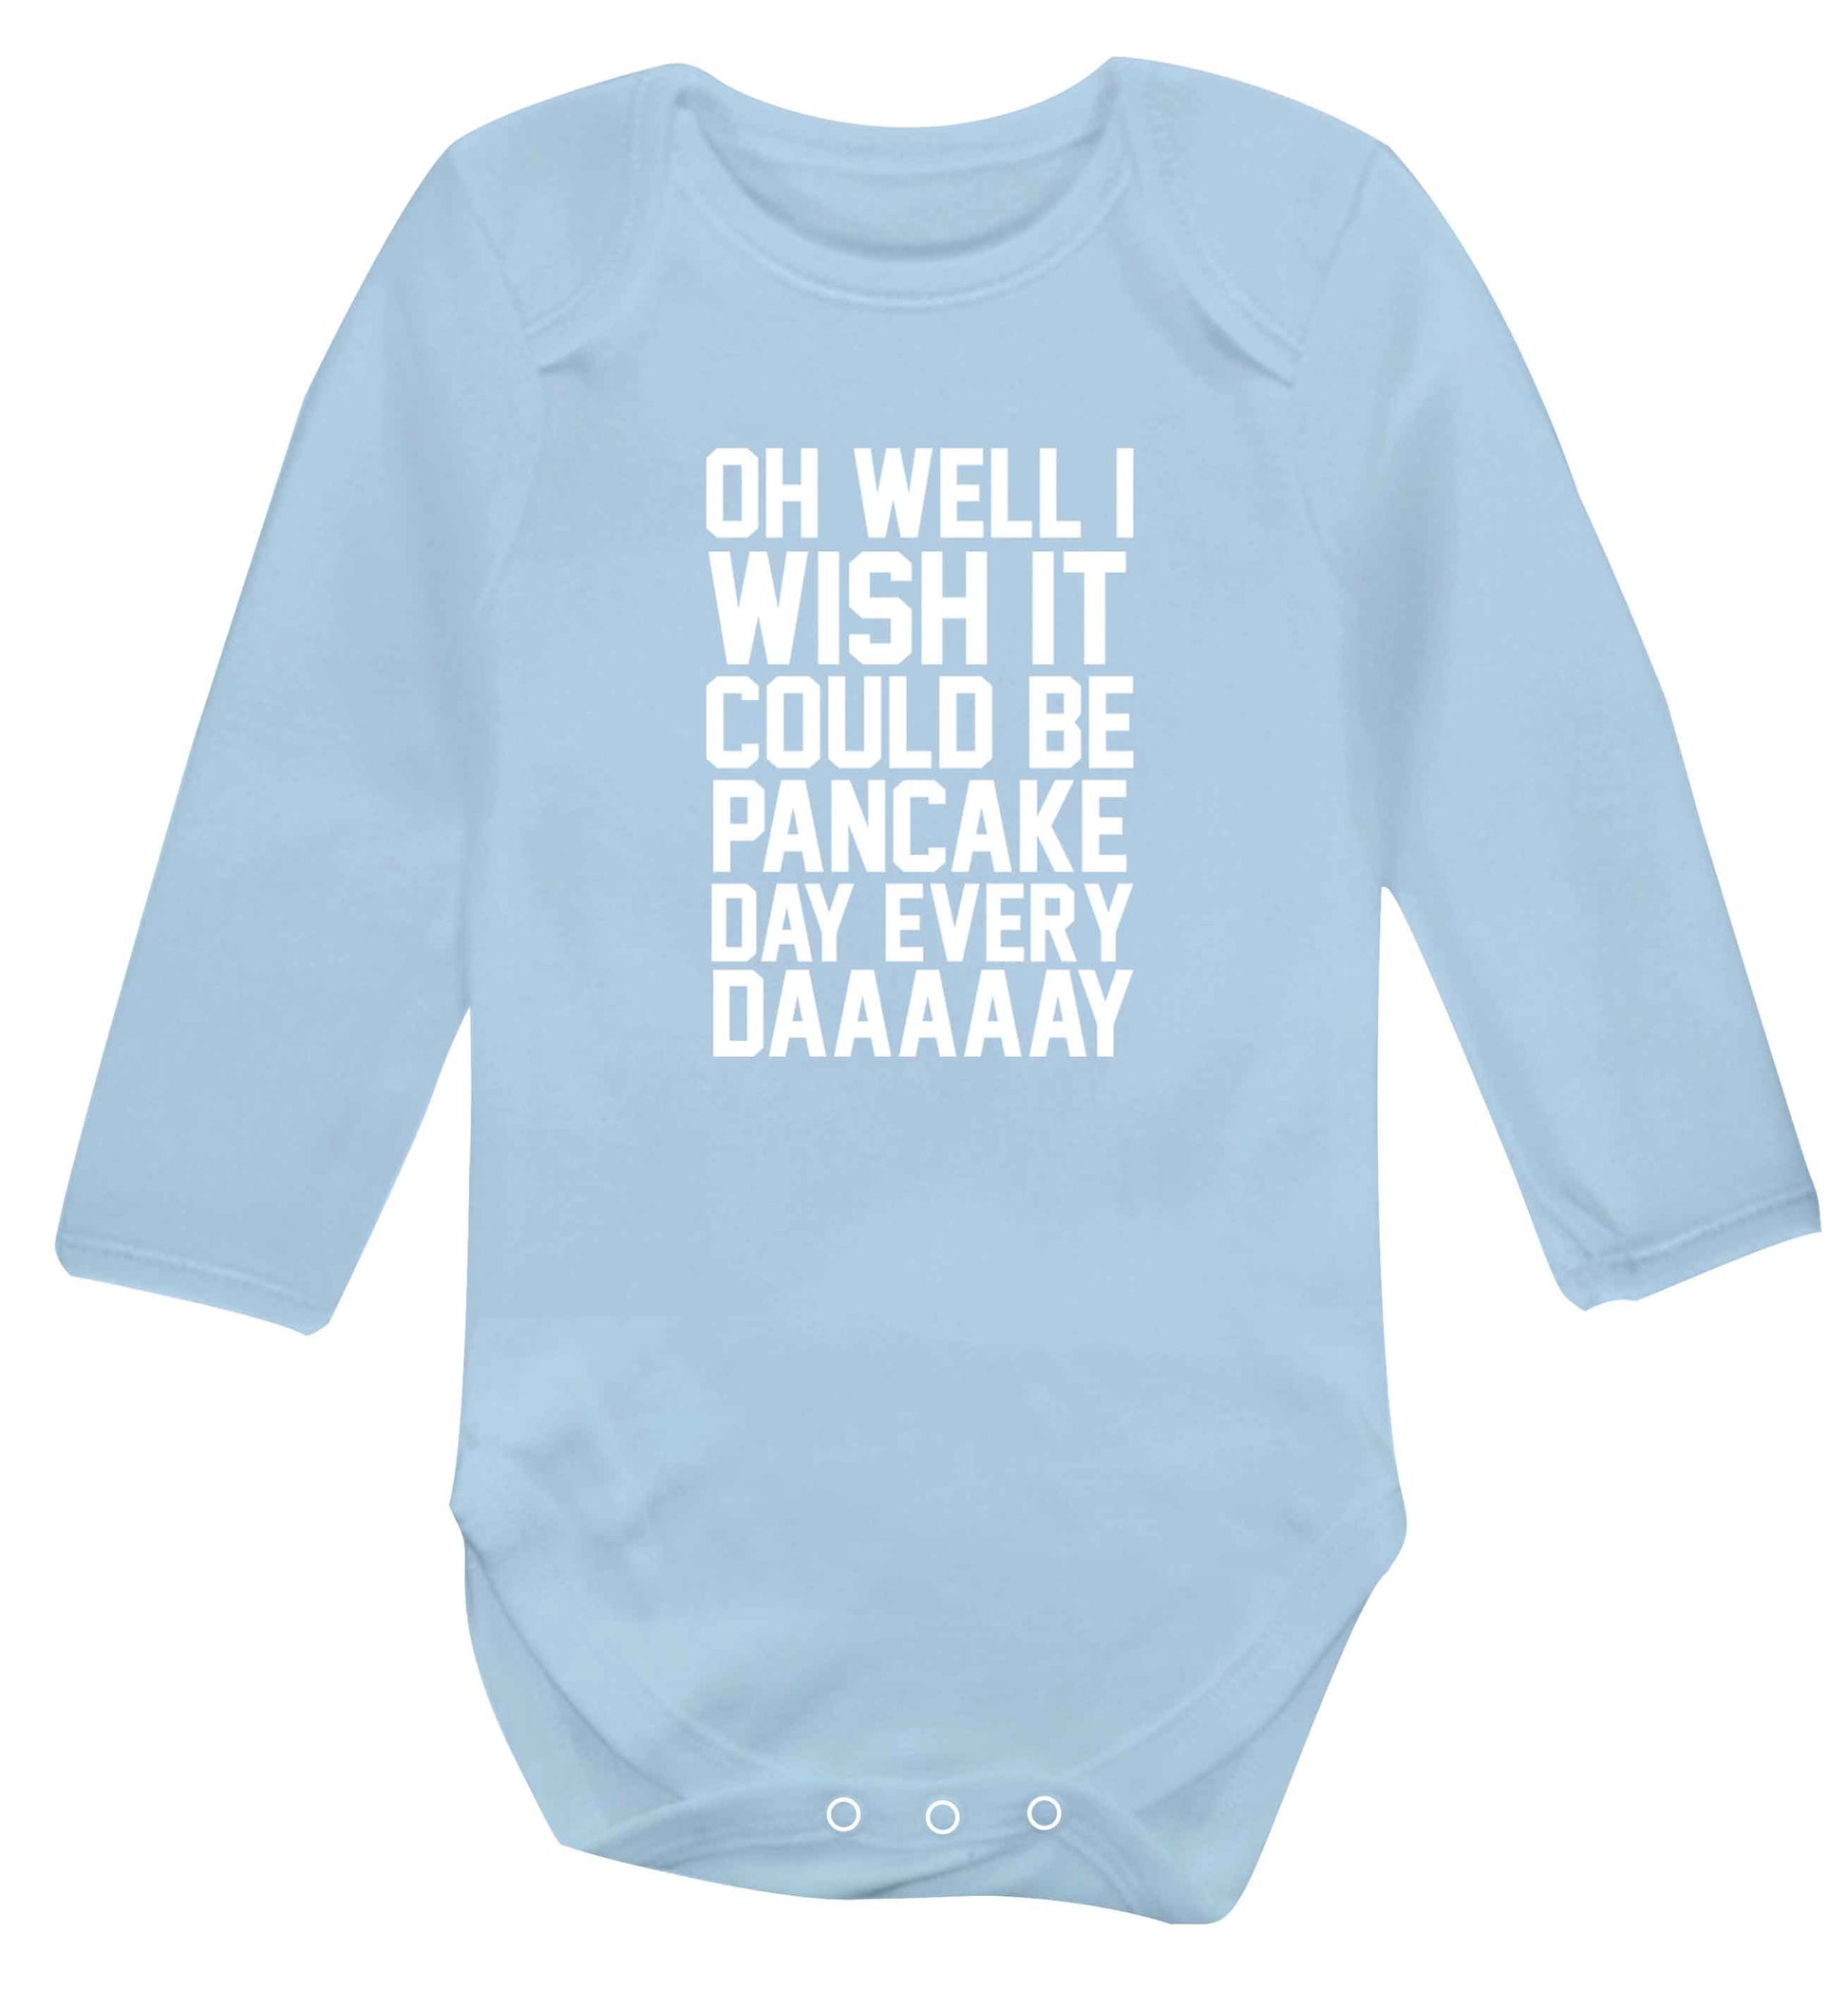 Oh well I wish it could be pancake day every day baby vest long sleeved pale blue 6-12 months